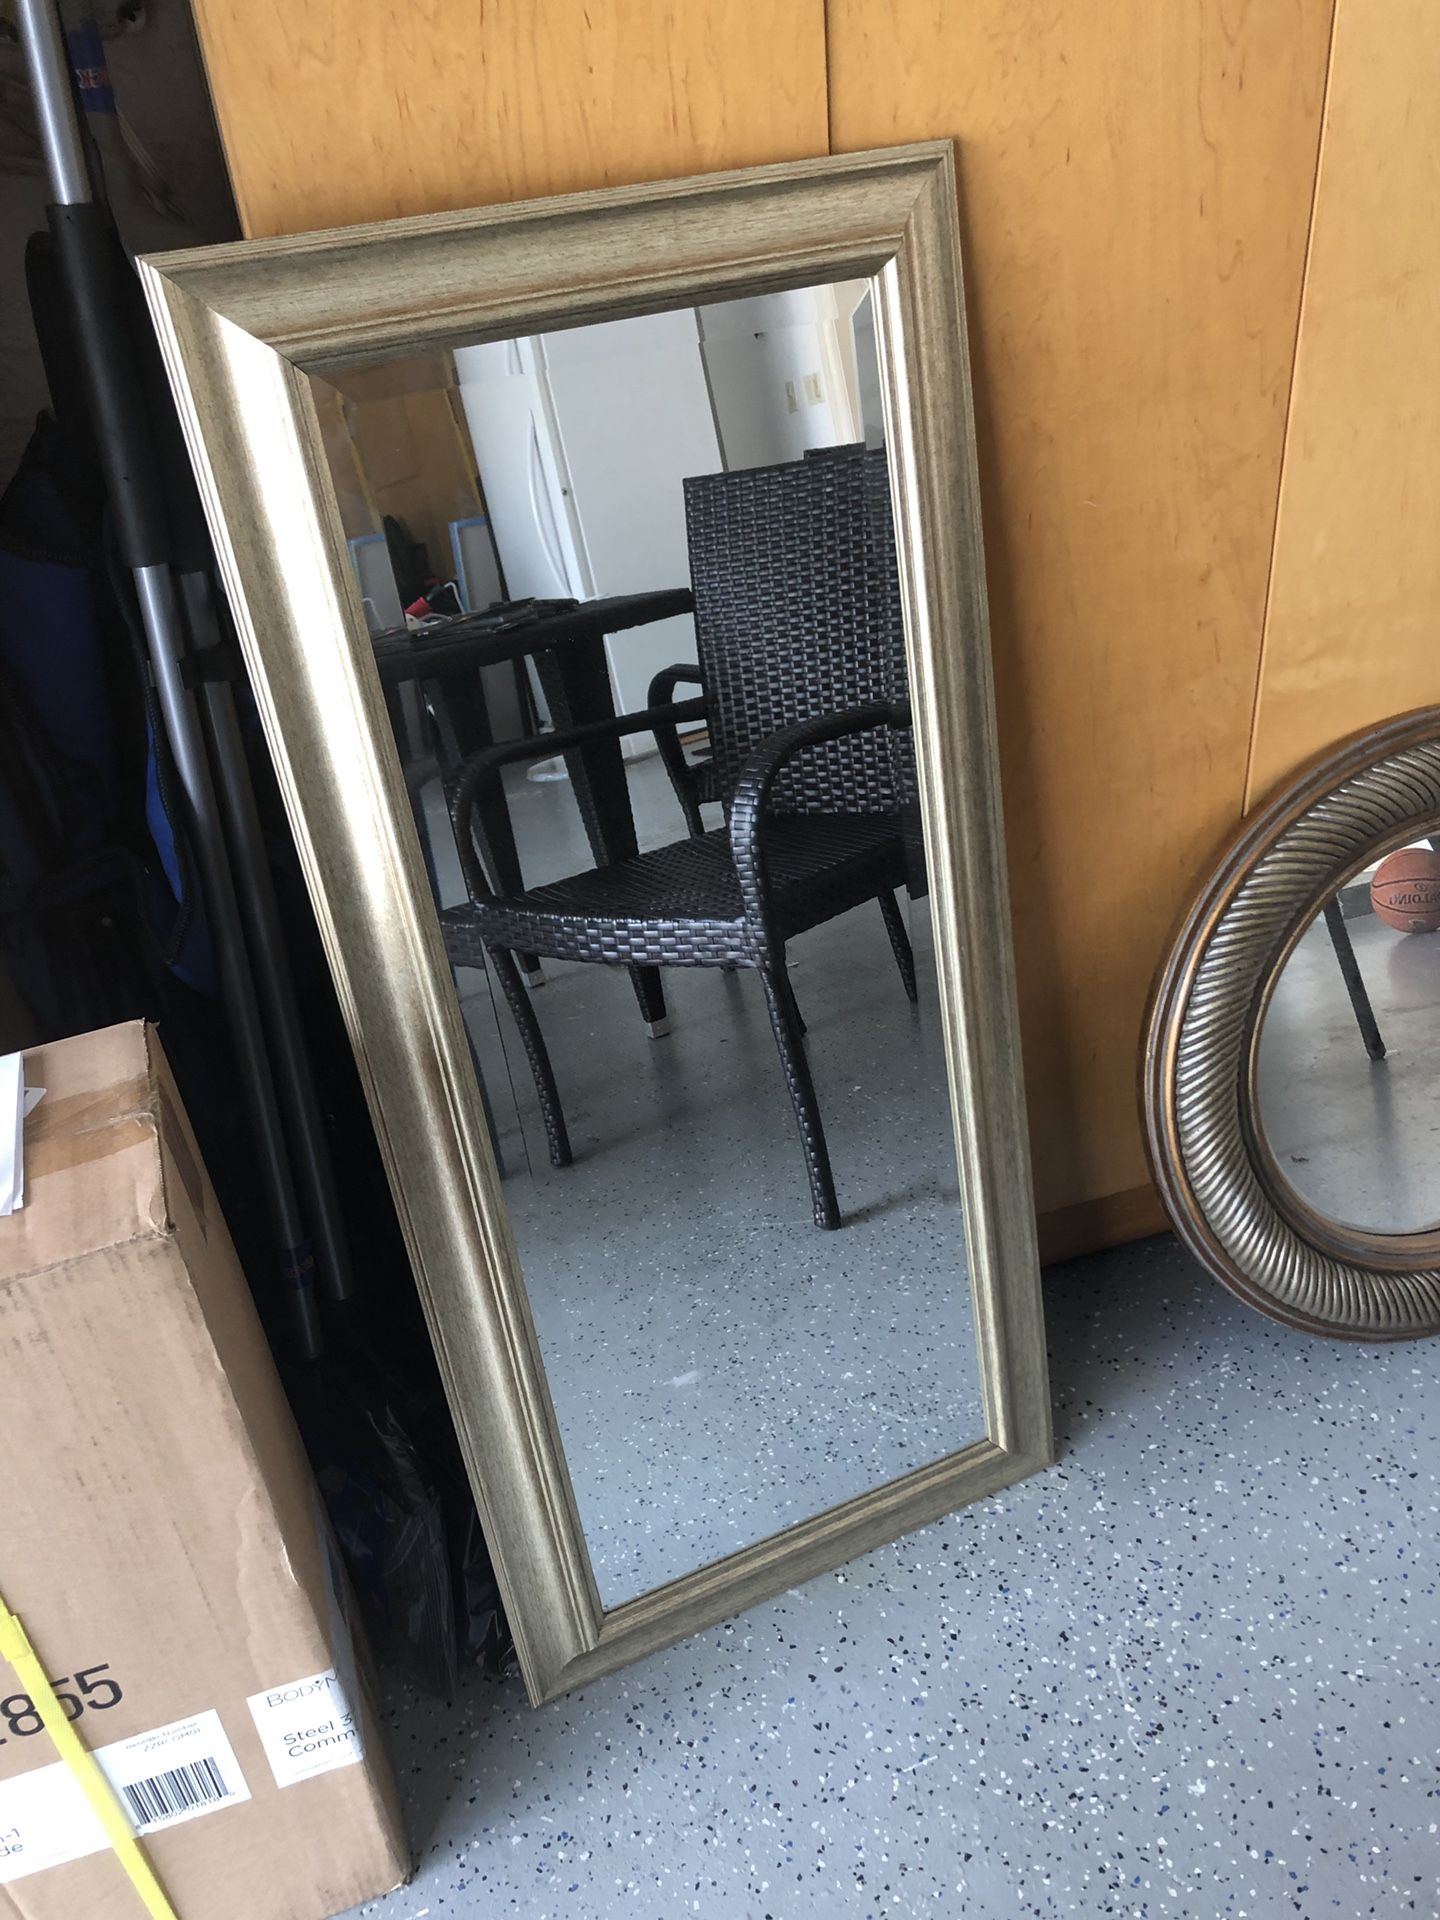 Mirrors for sale